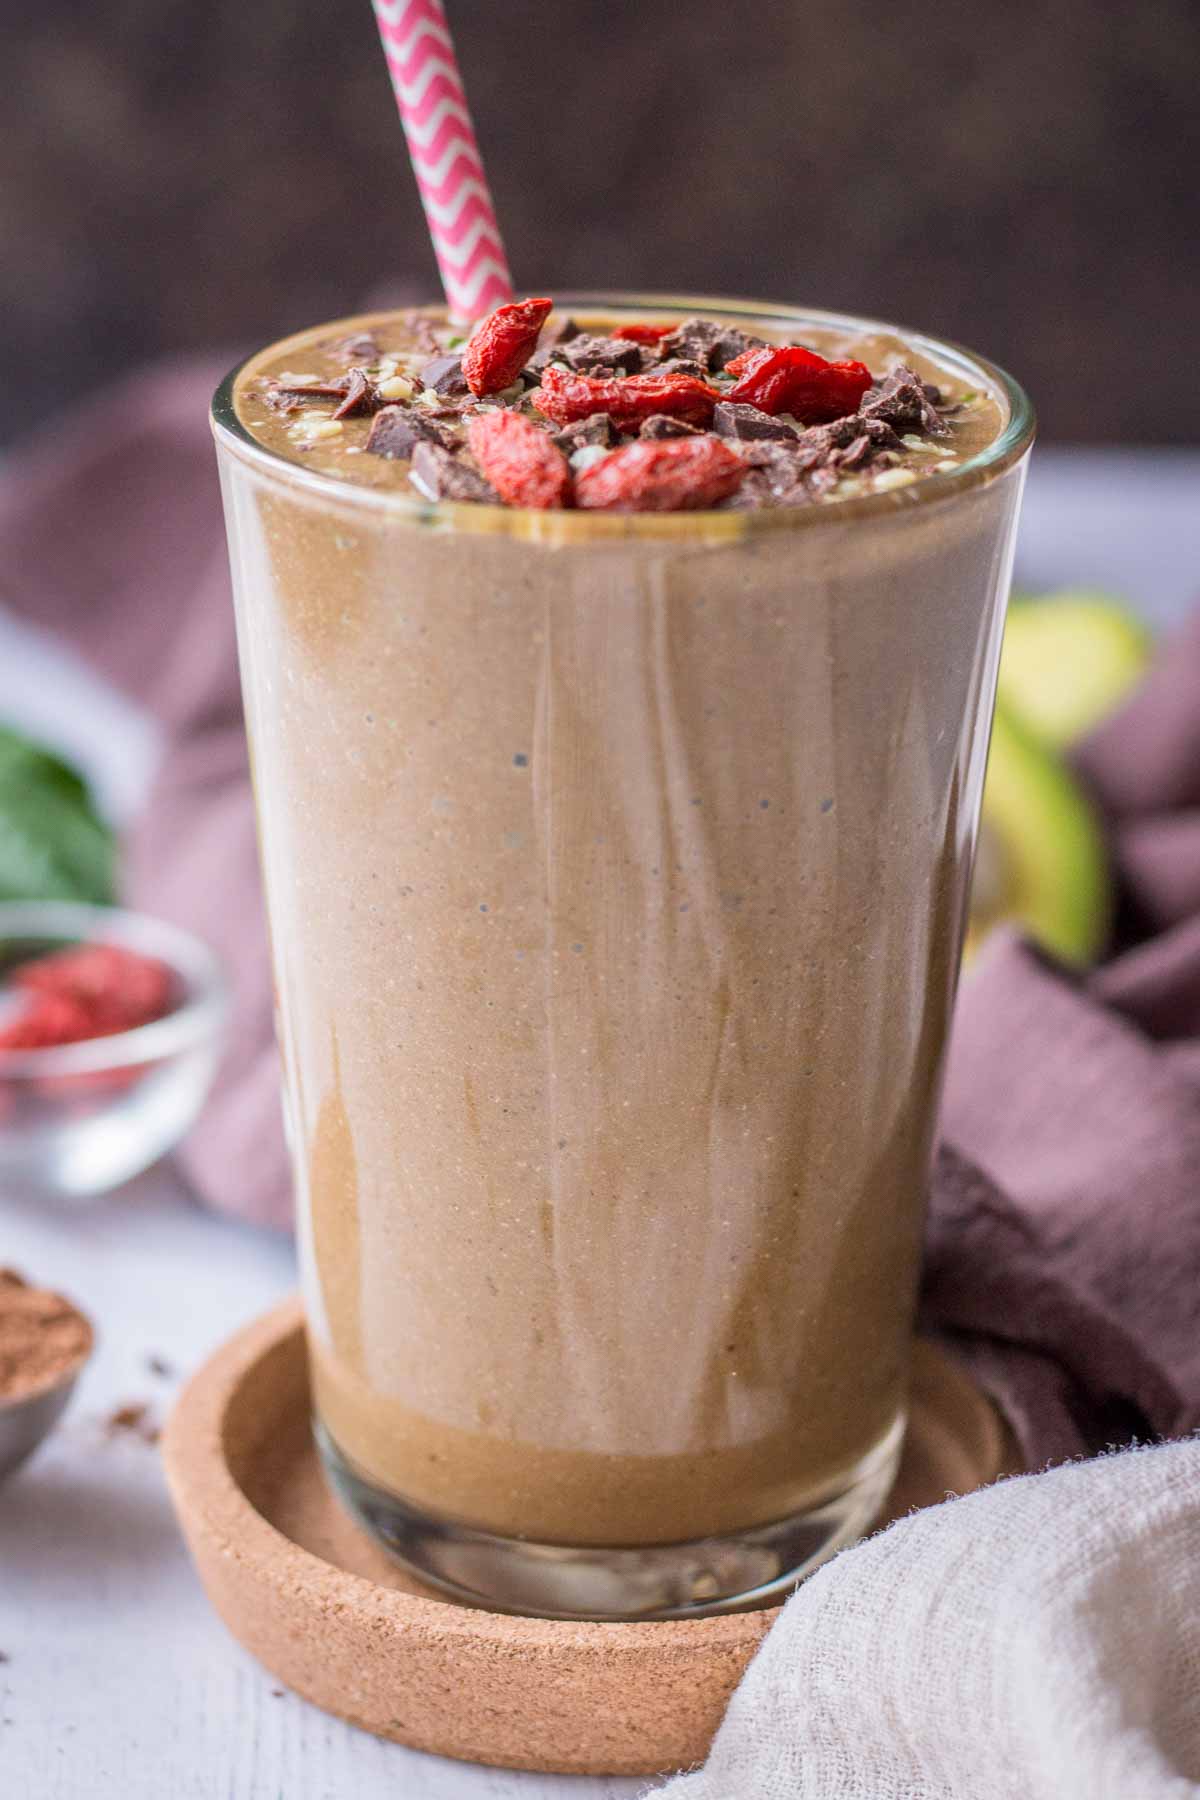 Chocolate banana avocado smoothie served in a smoothie glass topped with goji berries and chocolate